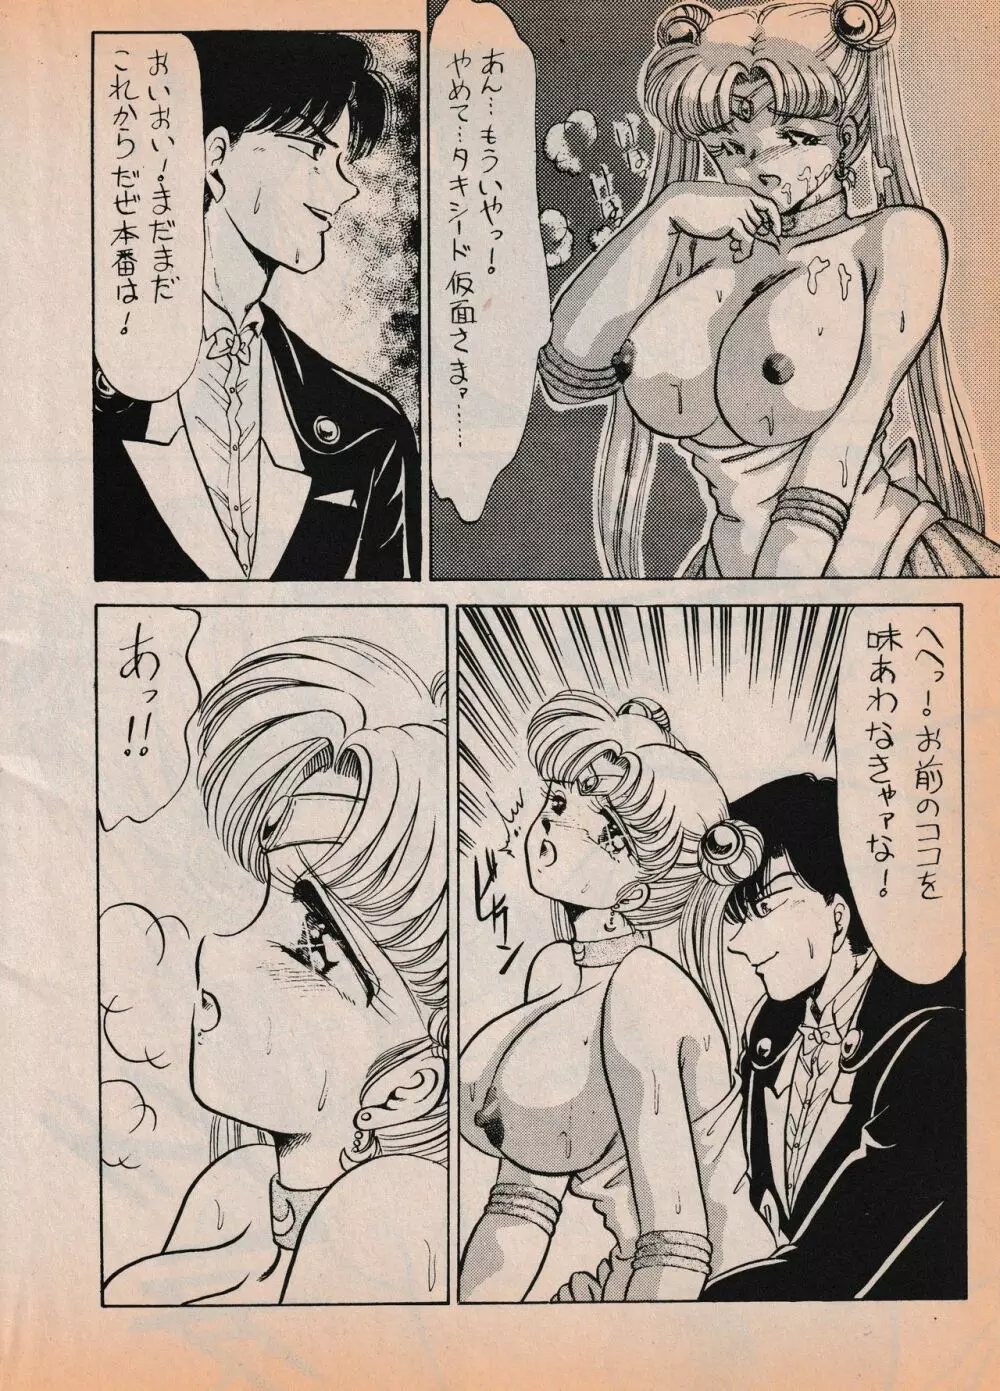 Sailor X vol. 7 - The Kama Sutra Of Pain Page.7